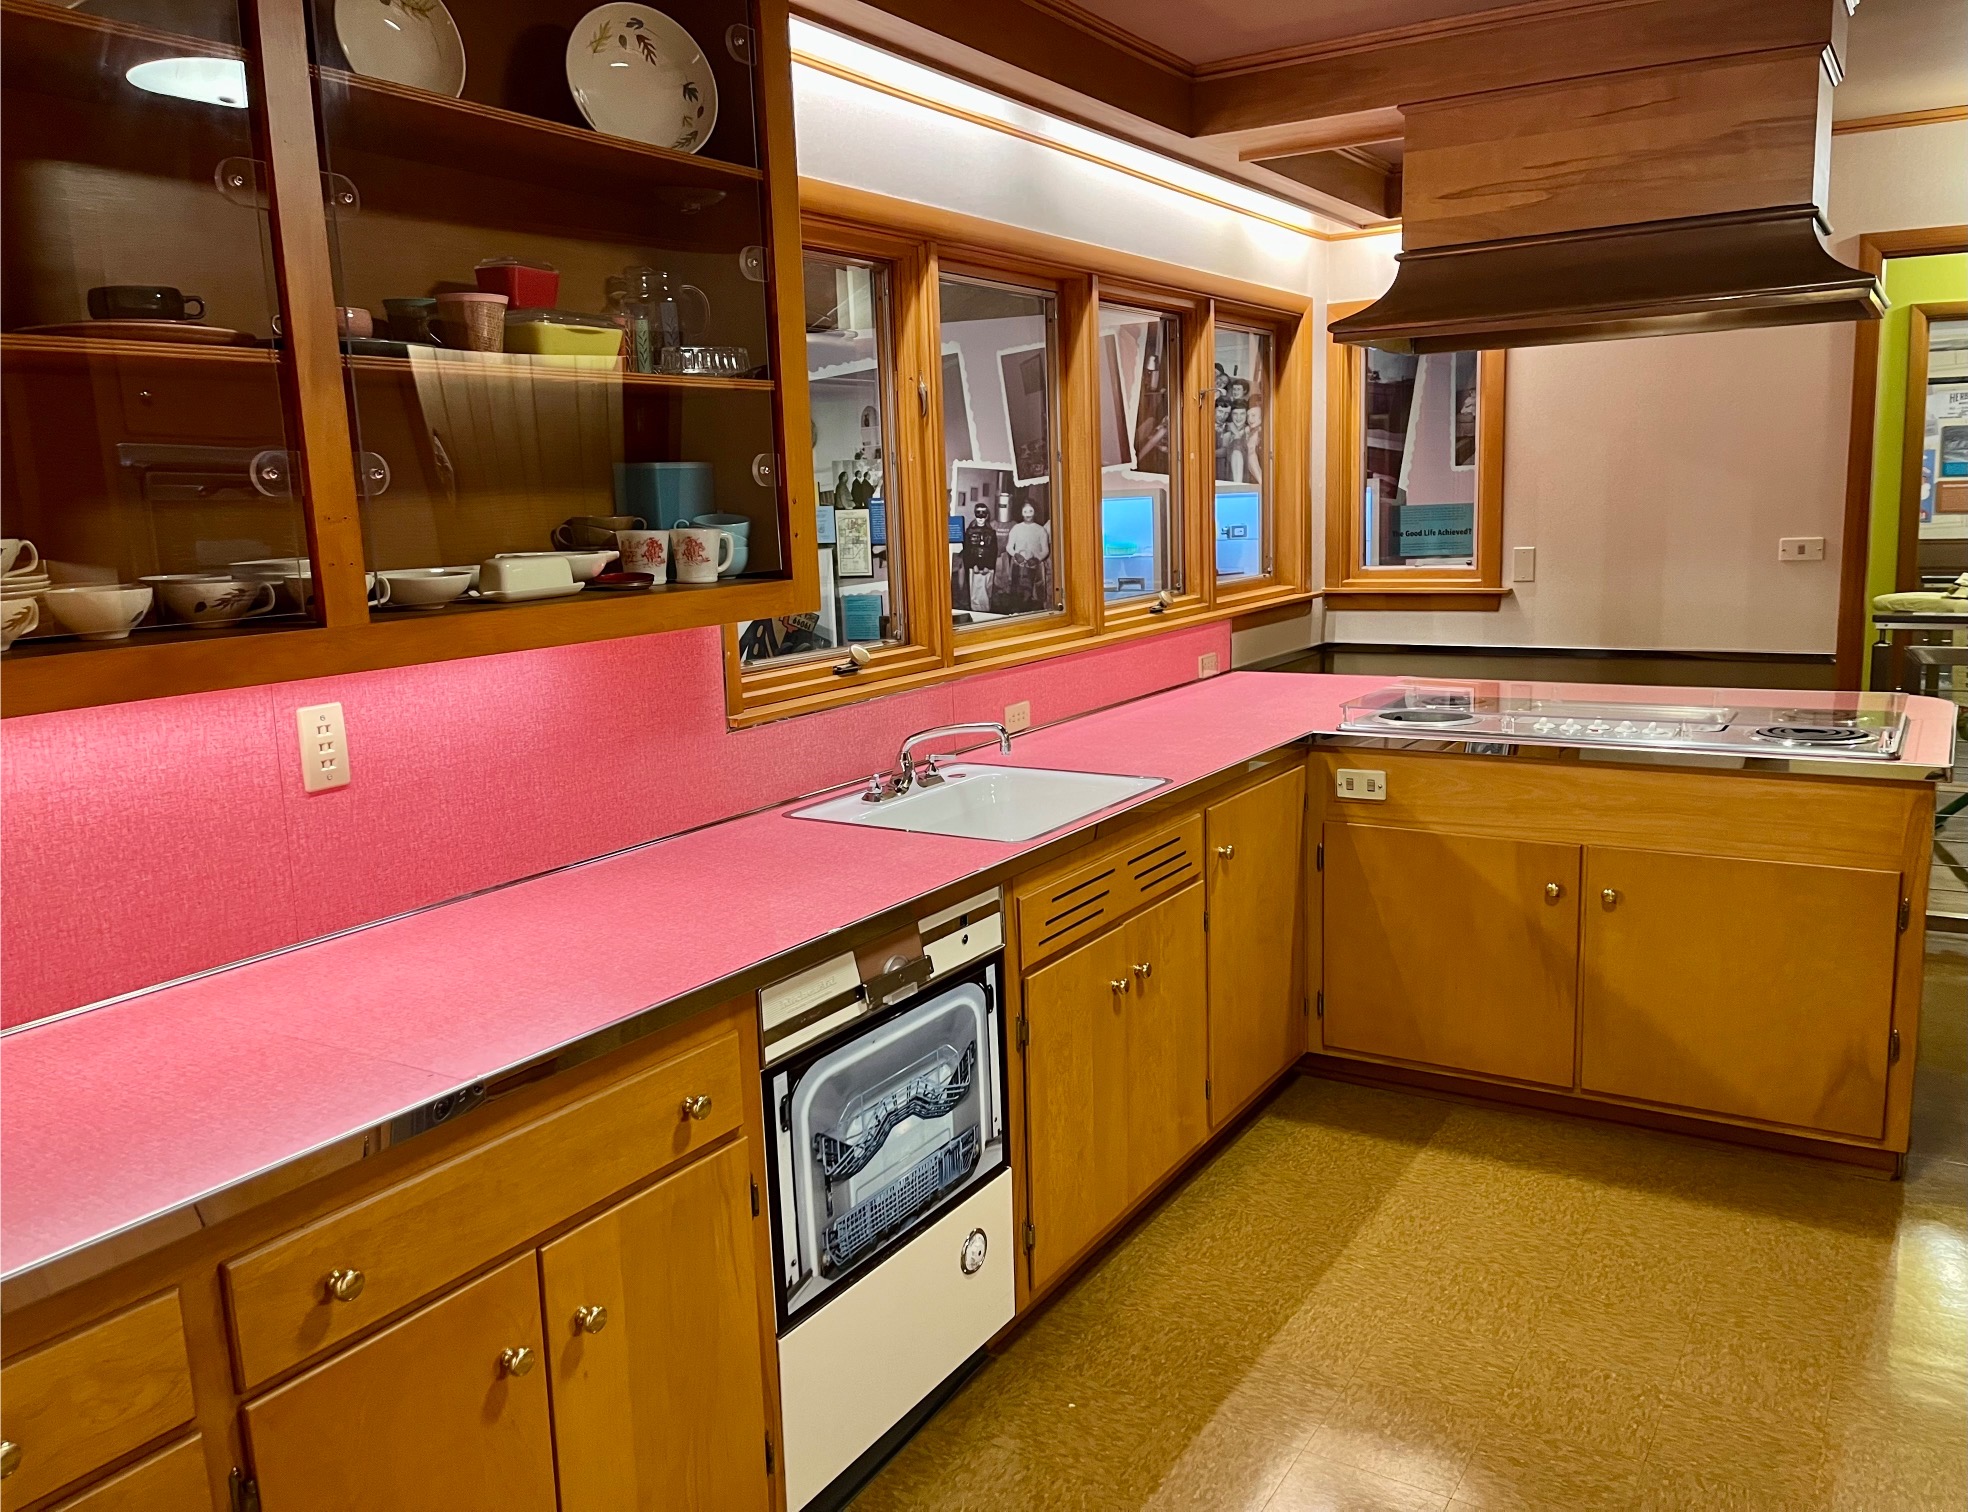 1950 All-Electric House kitchen